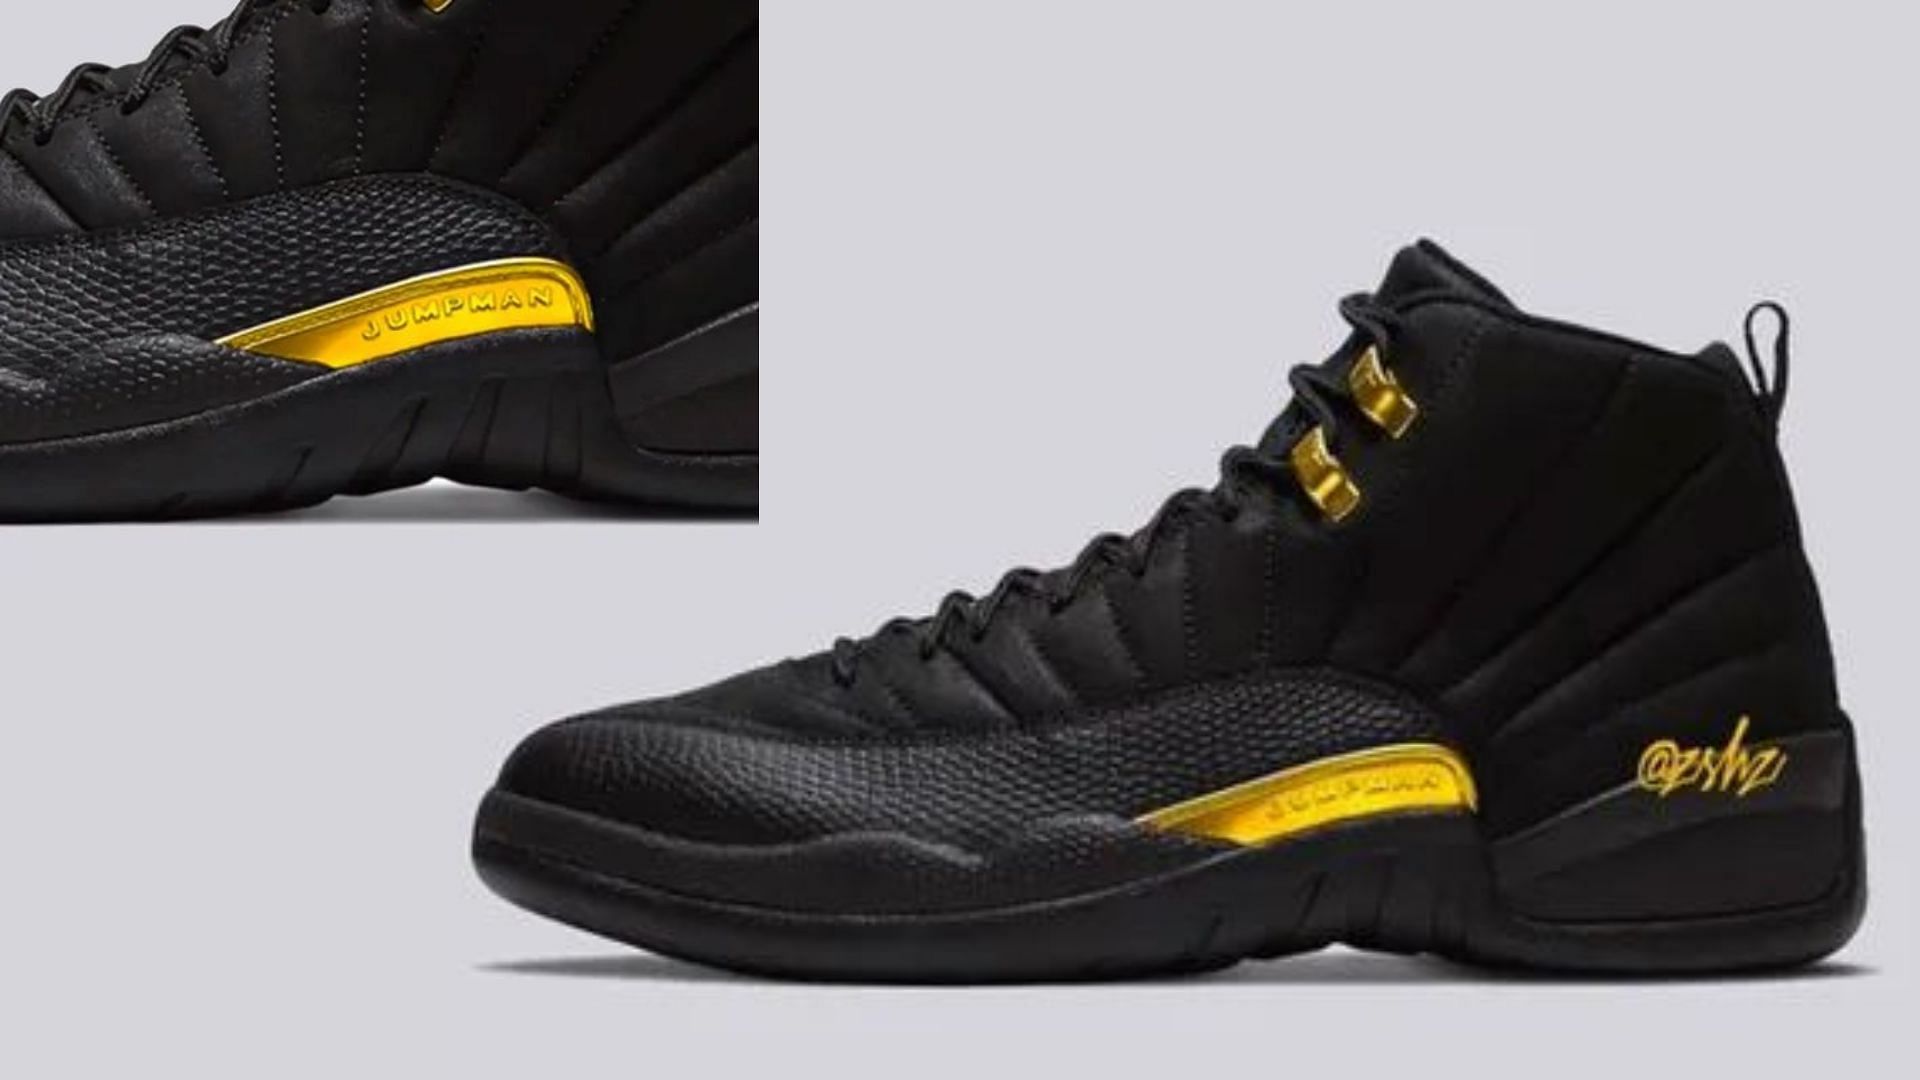 Take a closer look at the mockup of the AJ12 Black Taxi colorway (Image via Instagram/@zsneakerheadz)